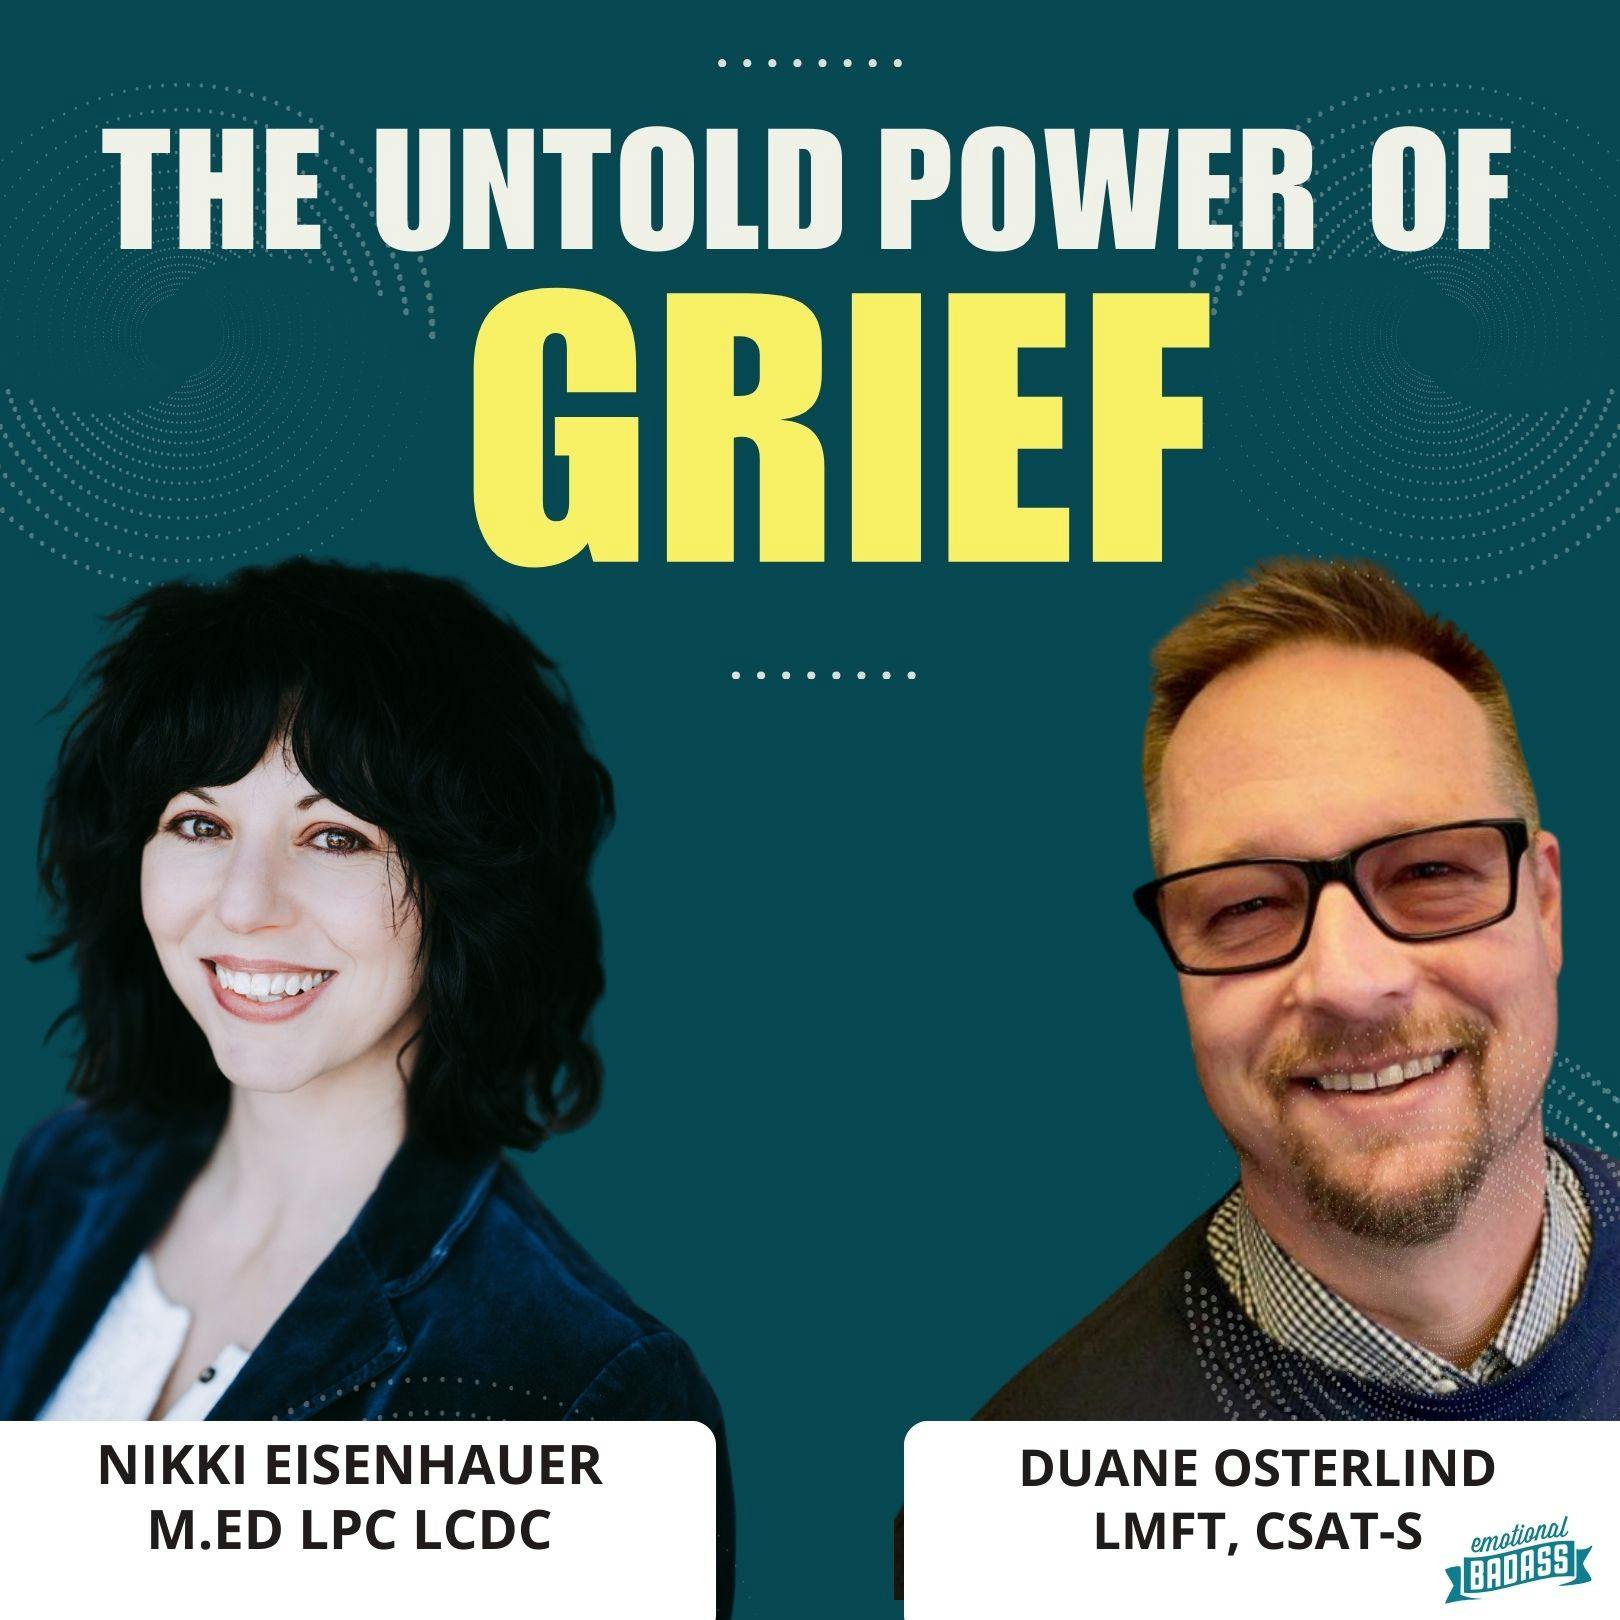 The Untold Power of Grief in Our Mental Health Journey: Interview with Duane Osterlind LMFT